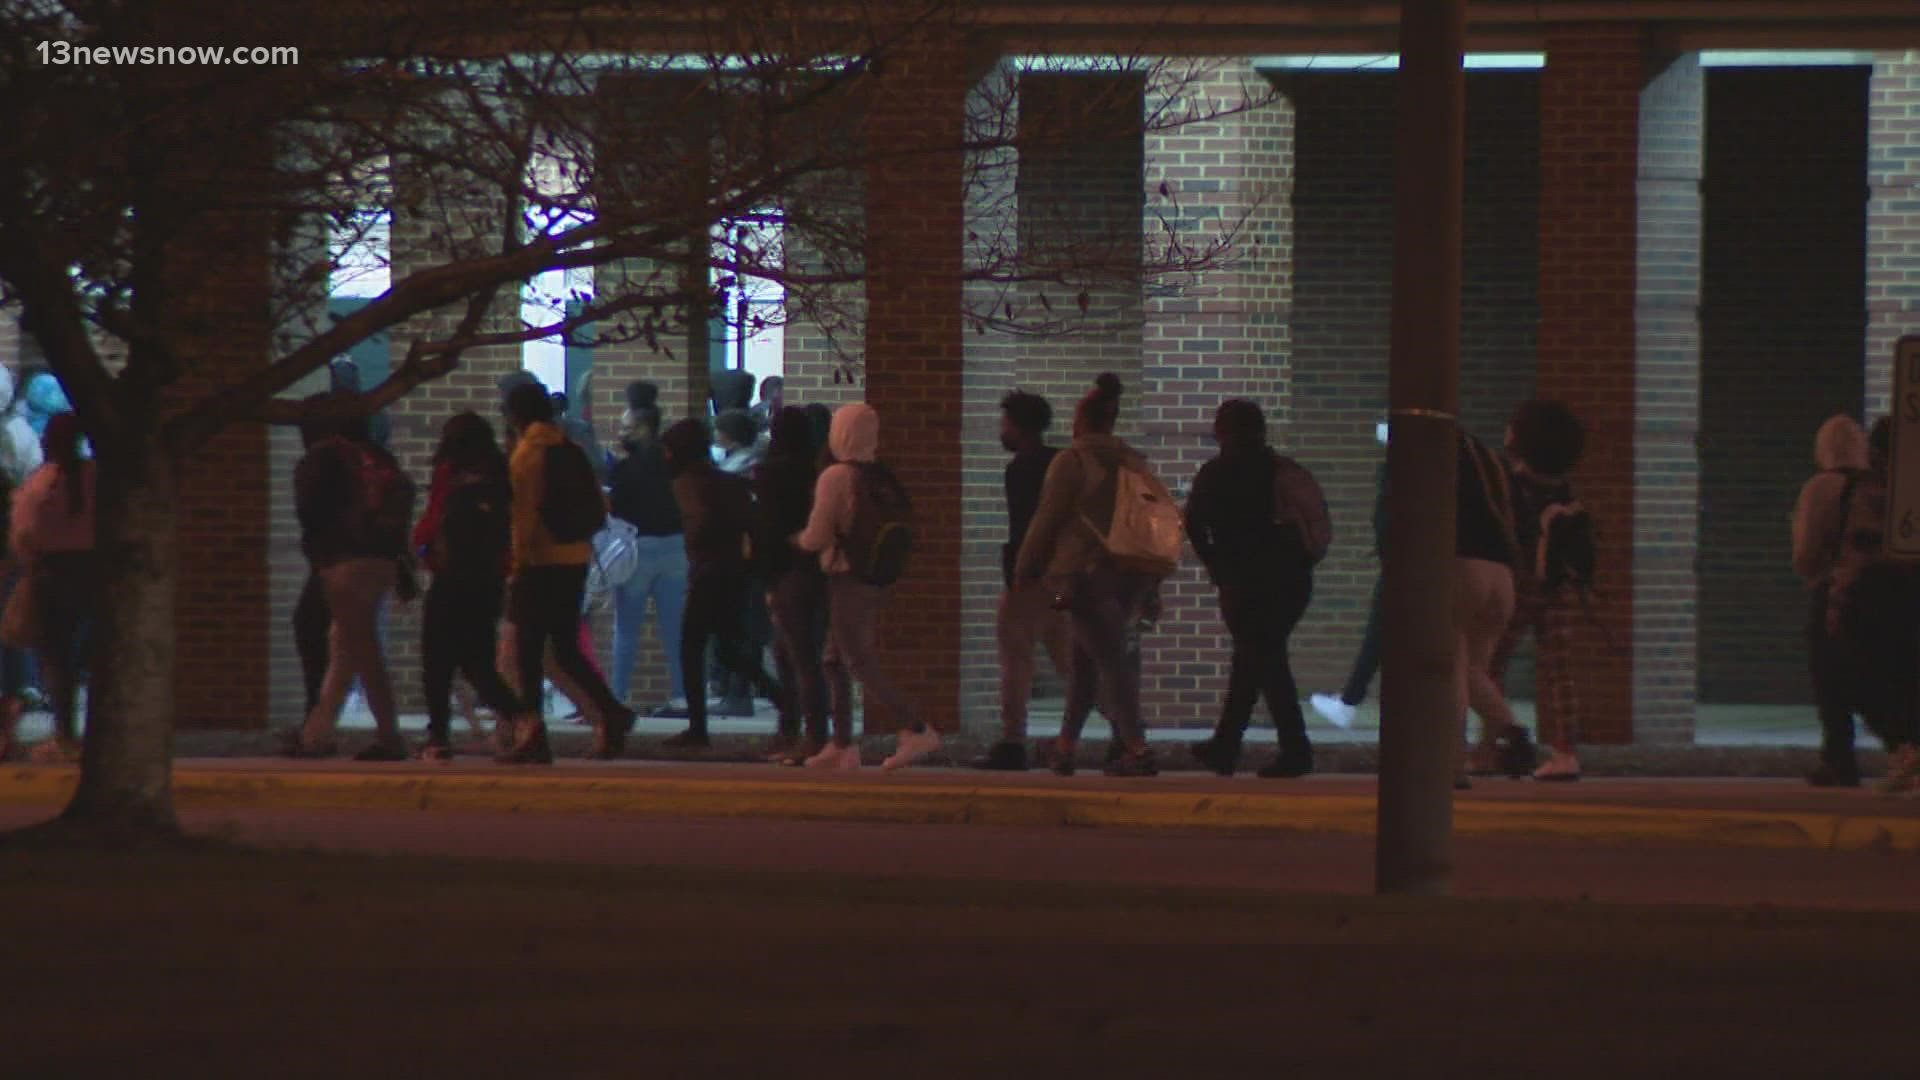 Heritage High School students returned to their building for in-person learning Wednesday morning following a shooting last month that injured two students.